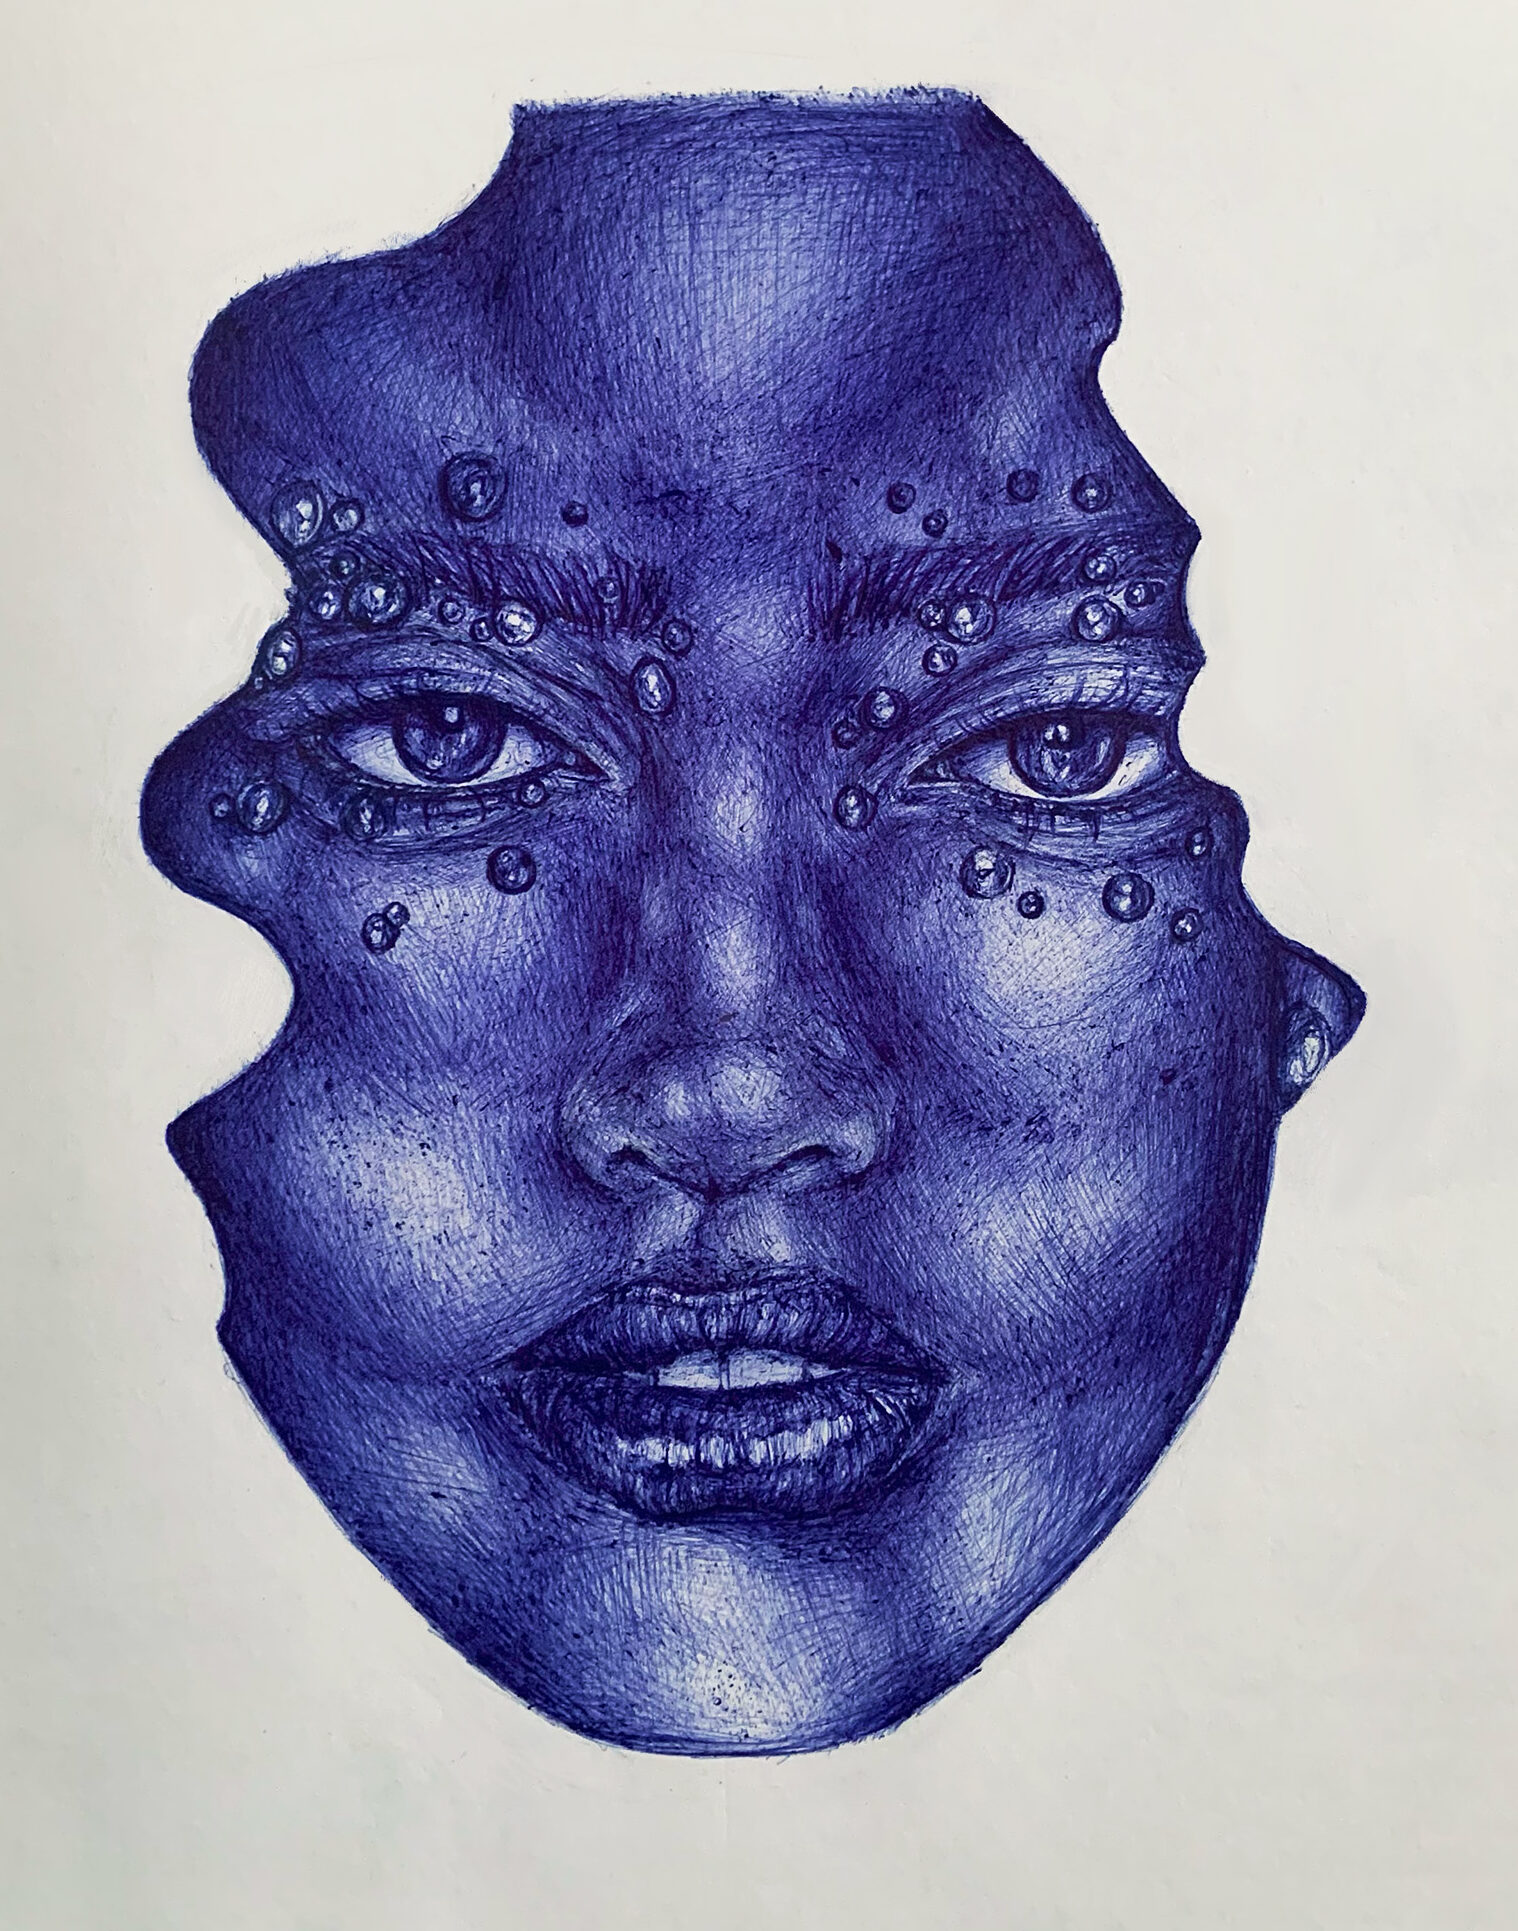 Realistic portrait of a woman's face done in blue pen ink.